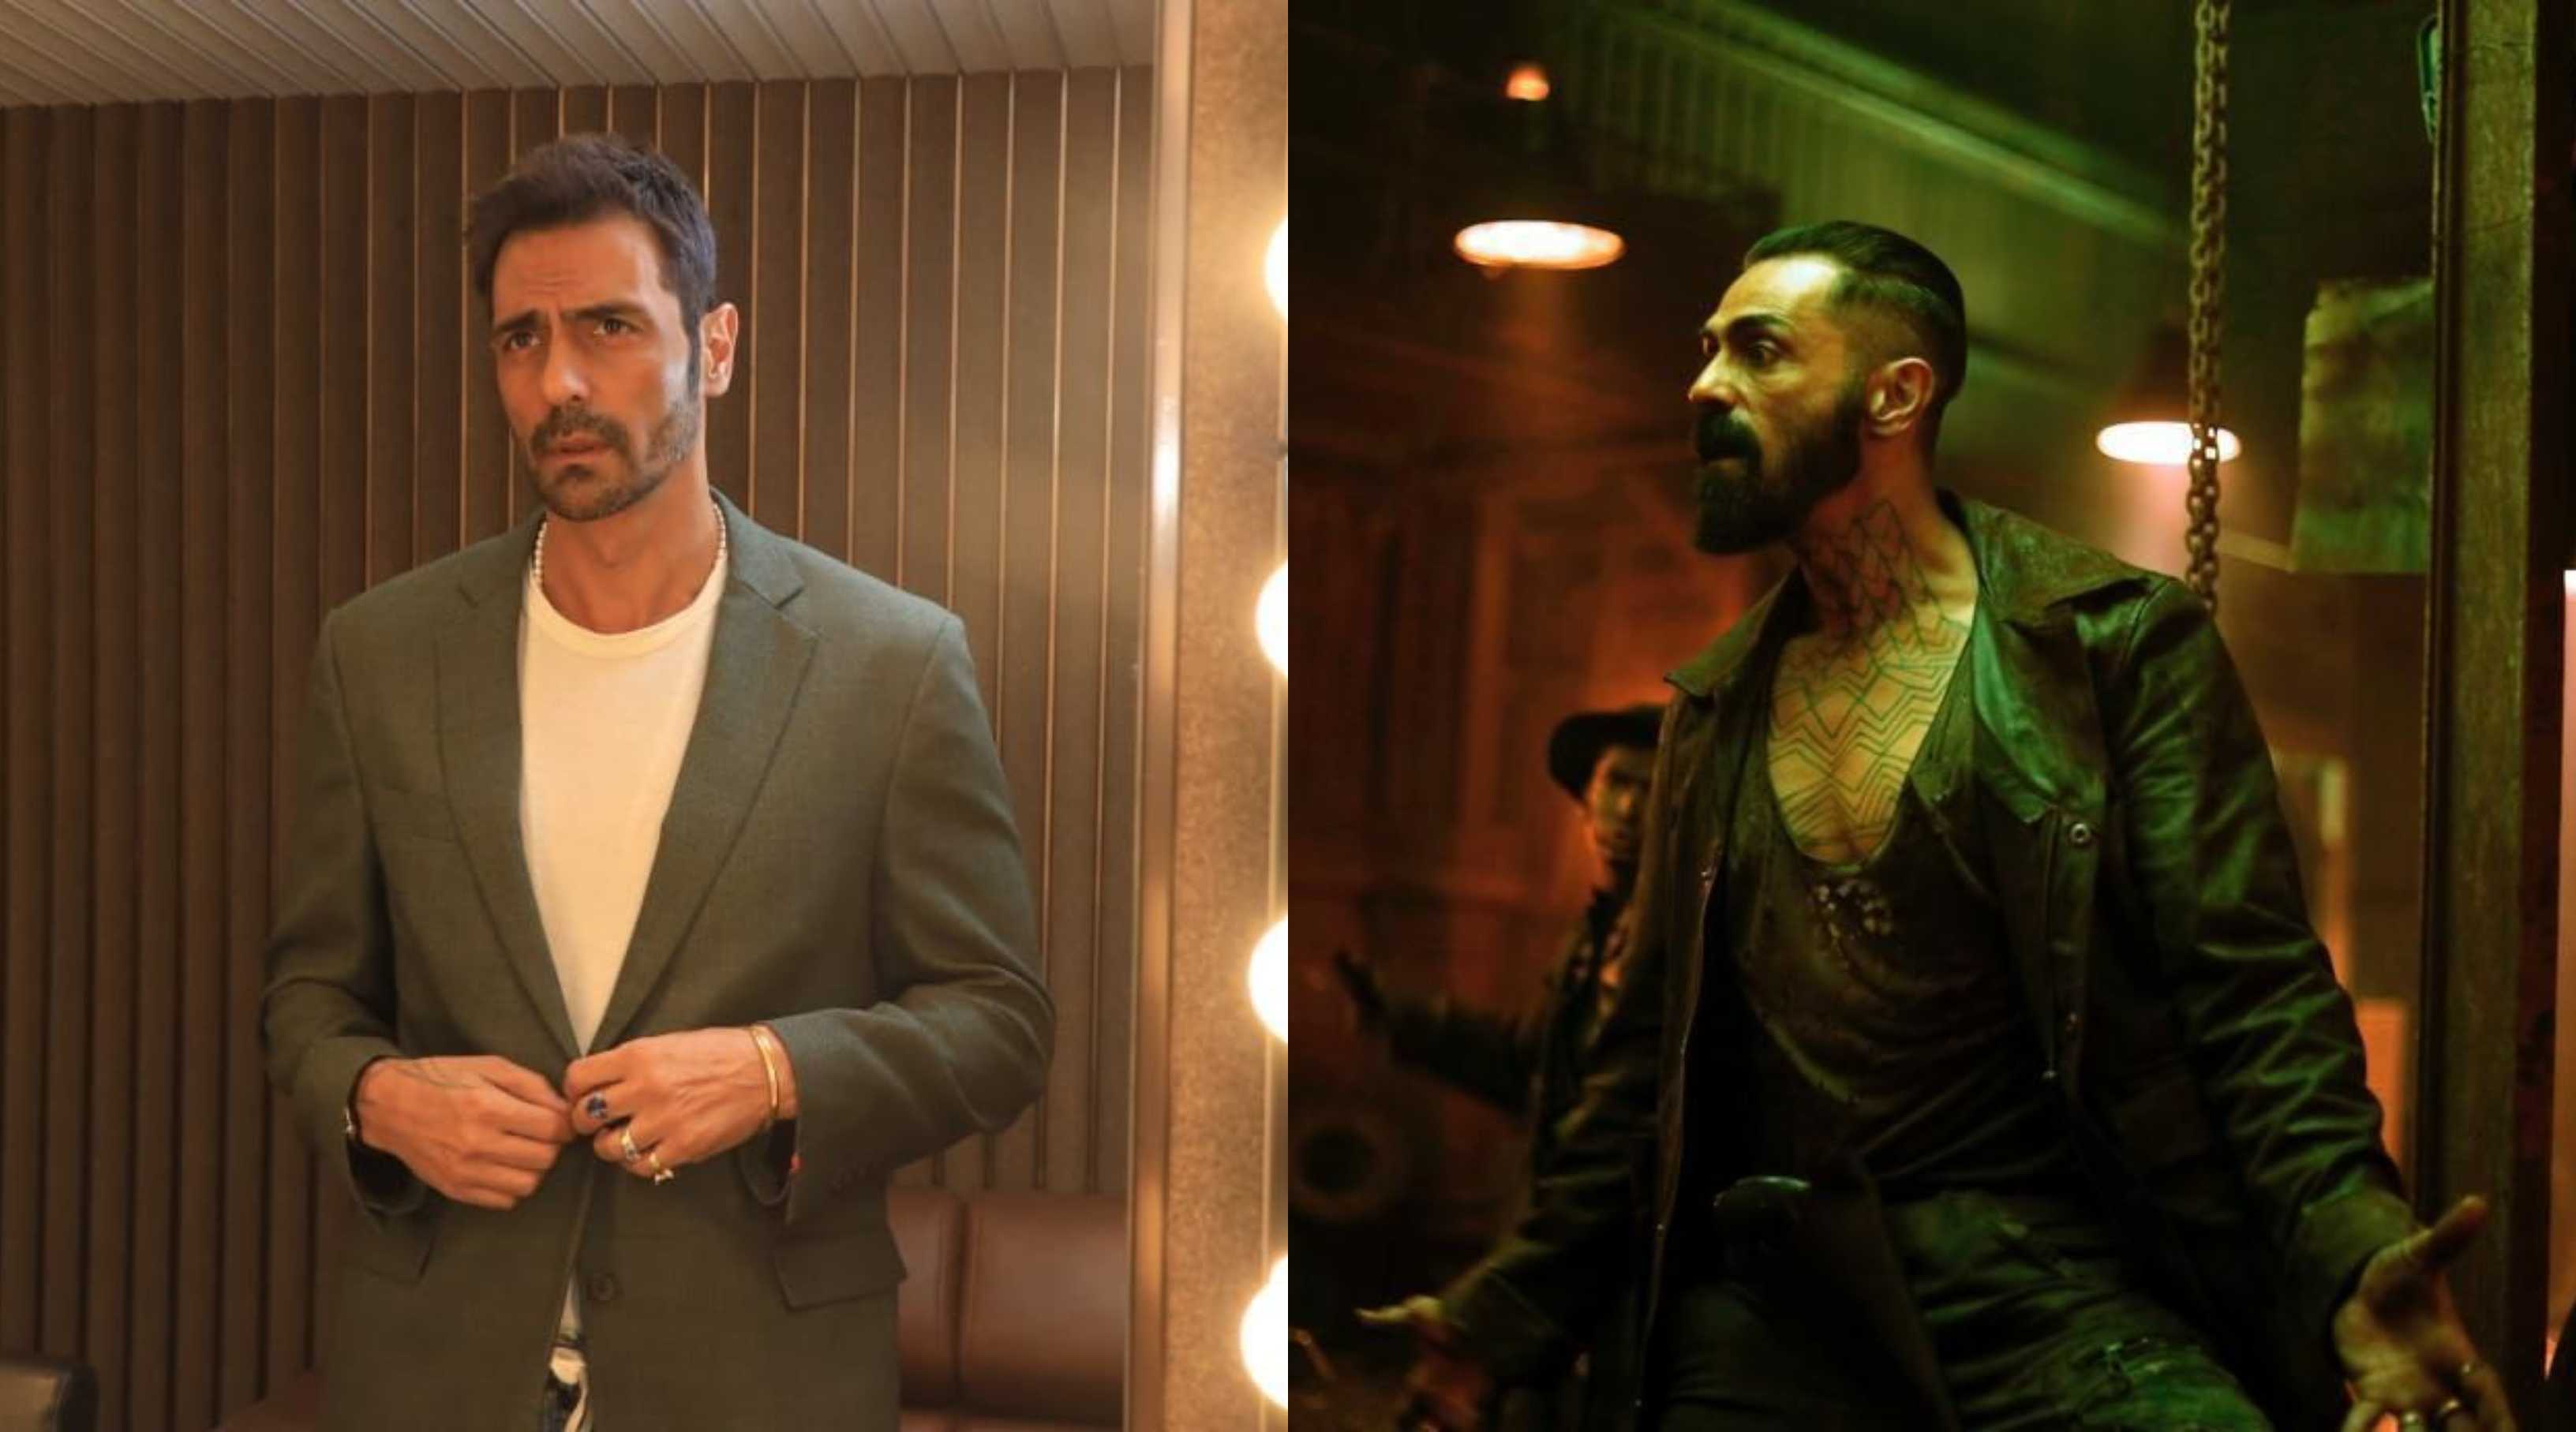 Arjun Rampal: ‘I’ve reached a place in my life where I want to pick and choose good work’